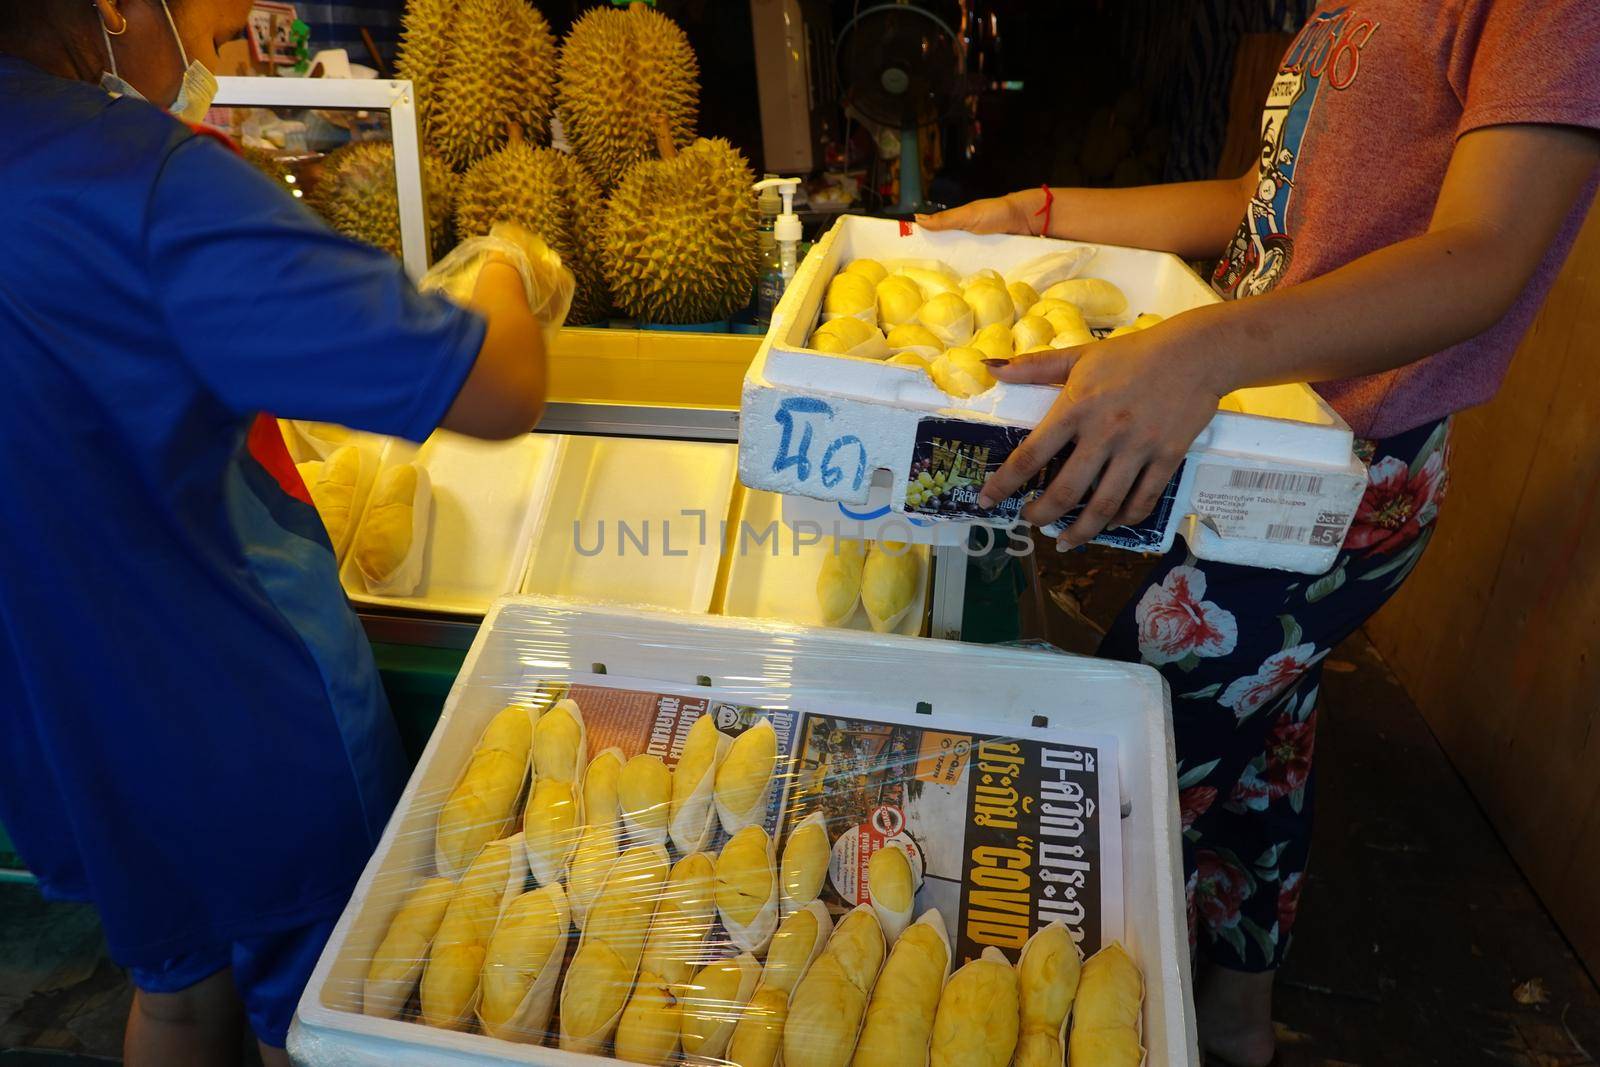 durian fruit in packages on sale in market, yellow durian in packaging as seasonal fruit of Thailand.  by chuanchai